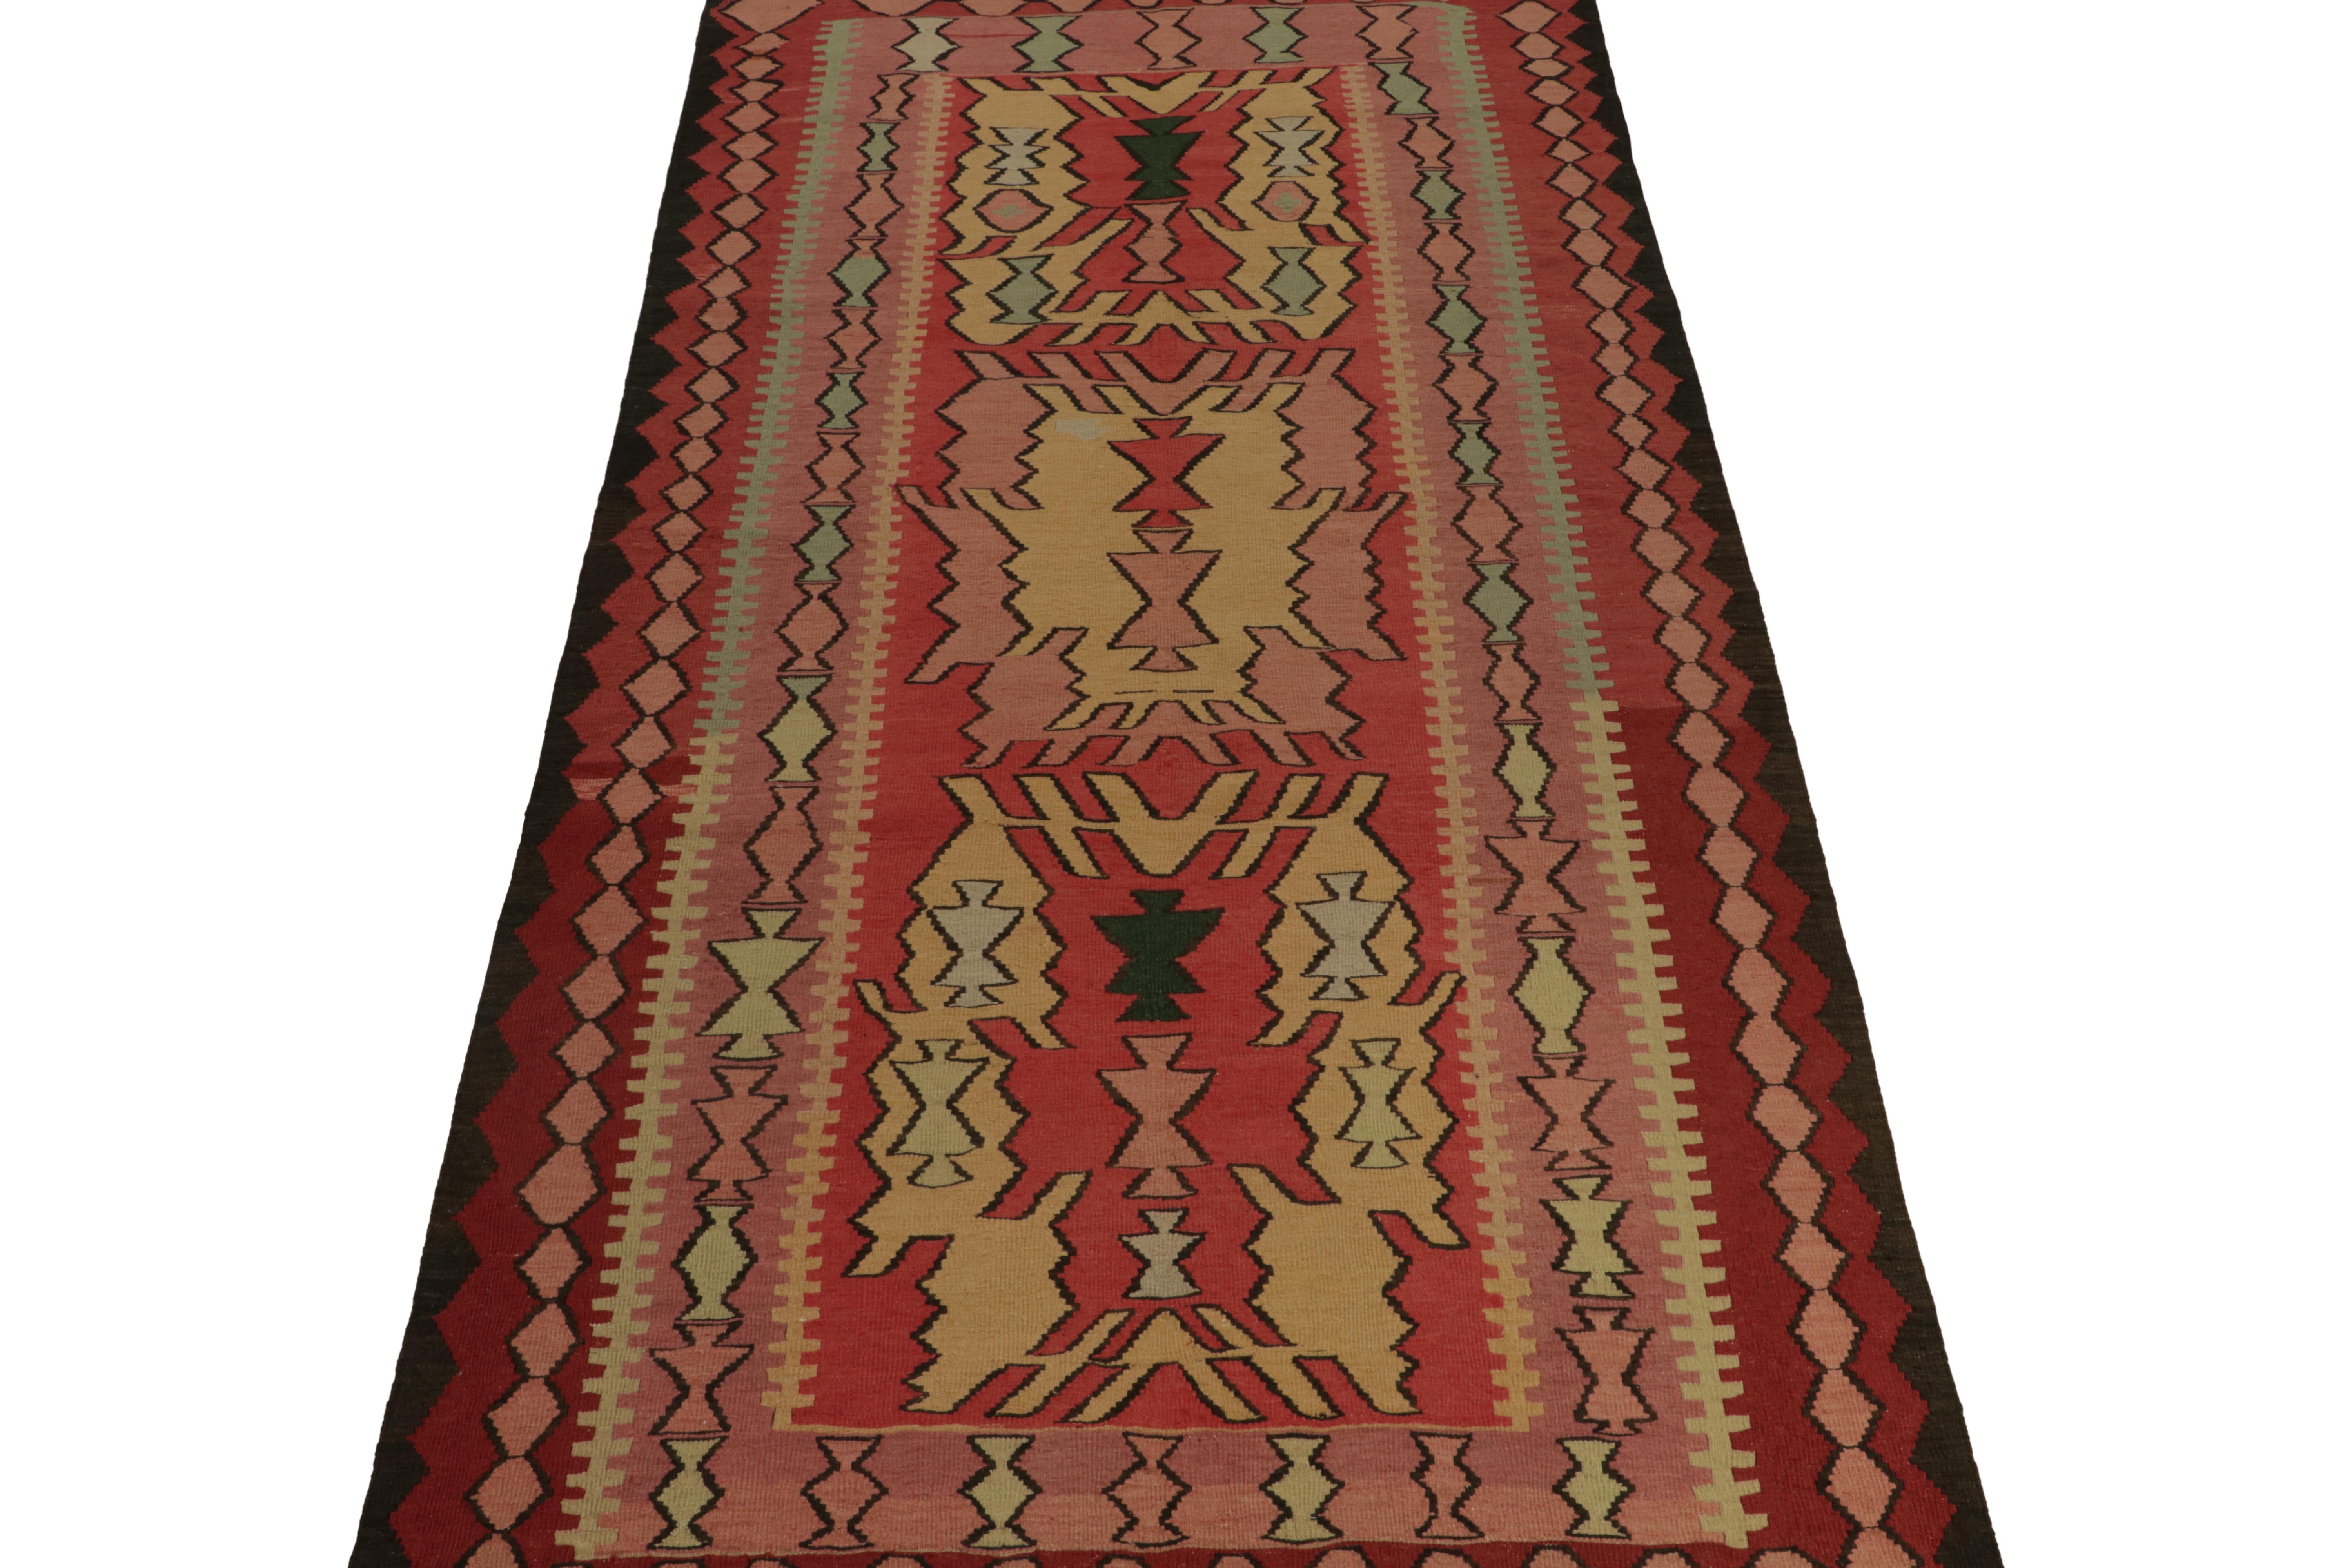 Hand-Knotted Vintage Persian Tribal Kilim Rug in Red, Pink, Gold Patterns Rug & Kilim For Sale